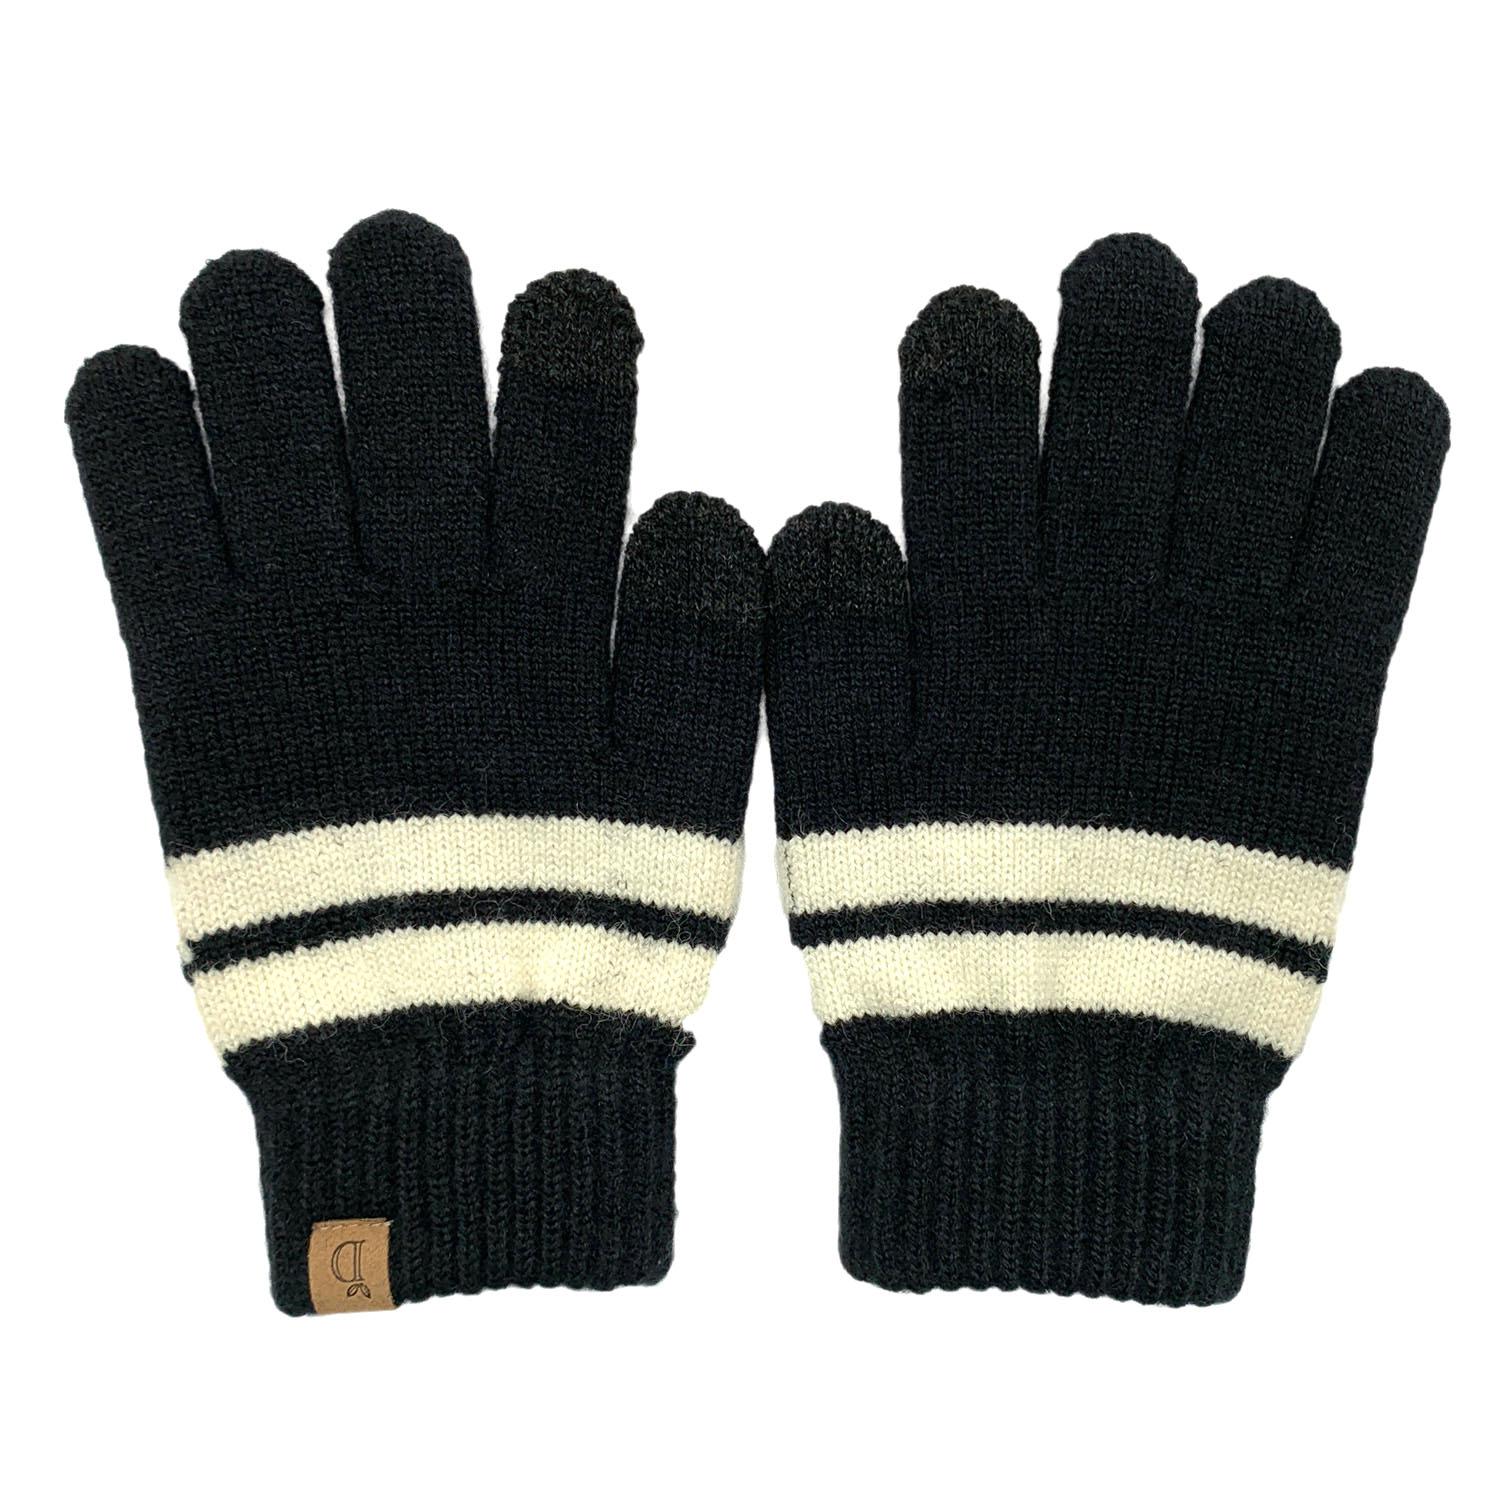 Empire Cove Winter Set Knit Striped Beanie and Touch Screen Gloves Gift Set-Hat/gloves-Empire Cove-Camel-Casaba Shop